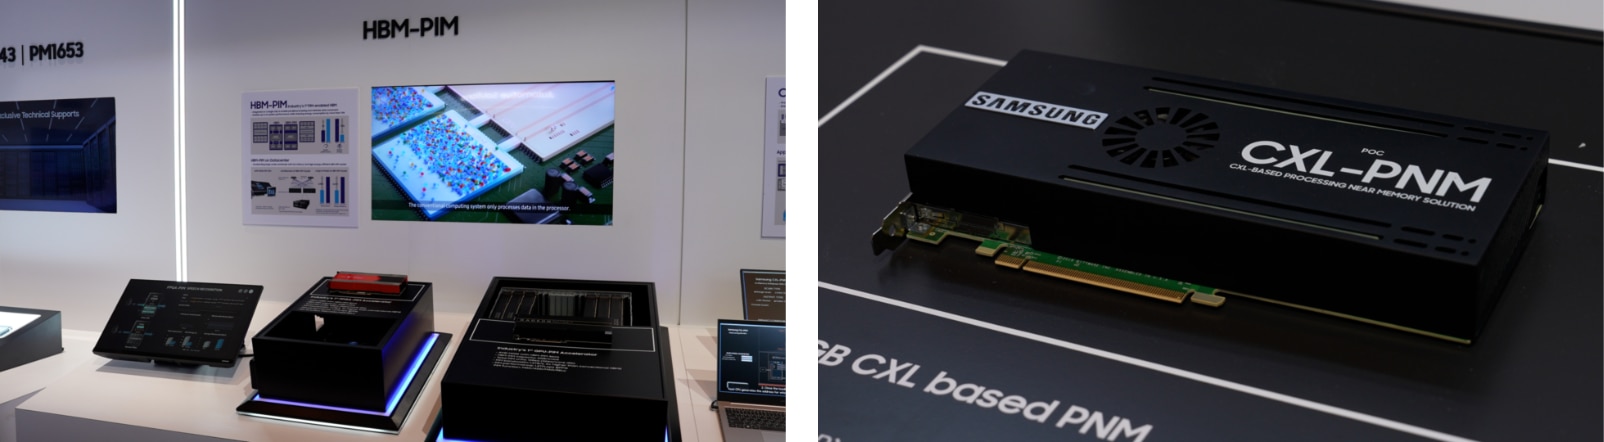 (Left) HBM-PIM technology is shown, detailing their impressive 50% energy reduction and improved performance compared to technology without PIM.  (Right) The CXL-PNM technology is shown in its designed use-case for expanding memory capacity for servers utilizing the CXL interface.  